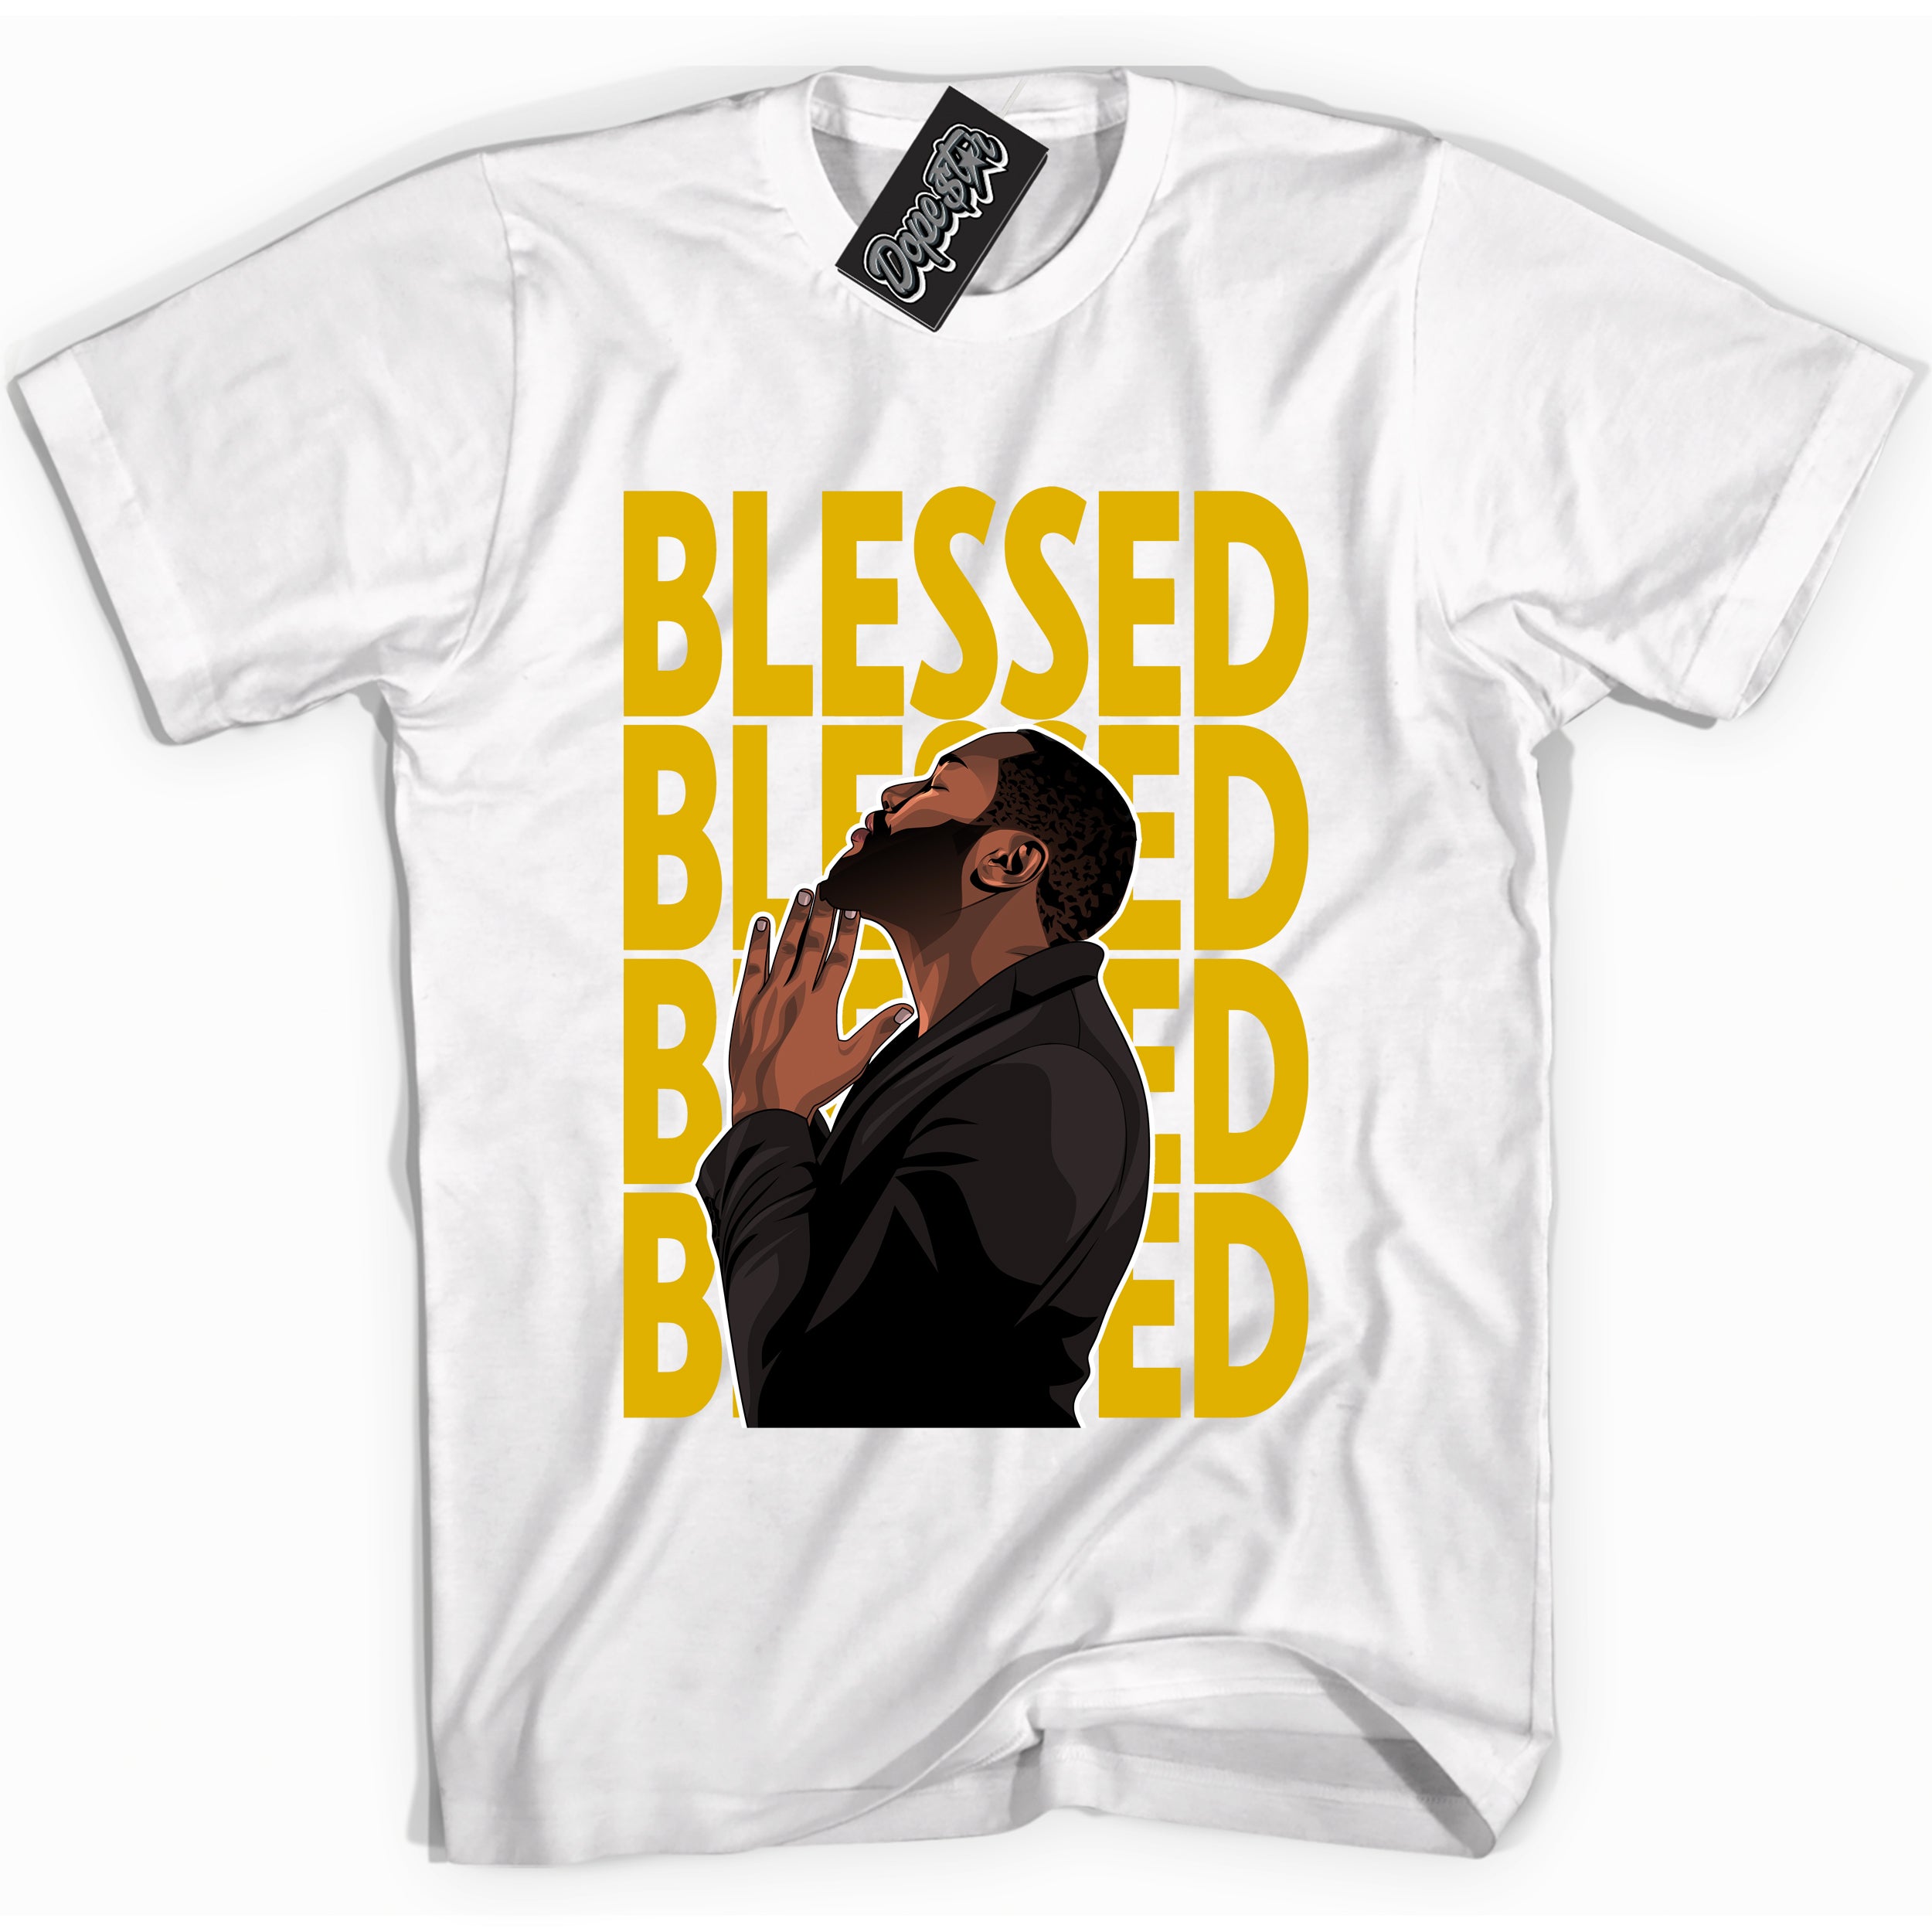 Cool White Shirt With God Blessed  design That Perfectly Matches YELLOW OCHRE 6s Sneakers.